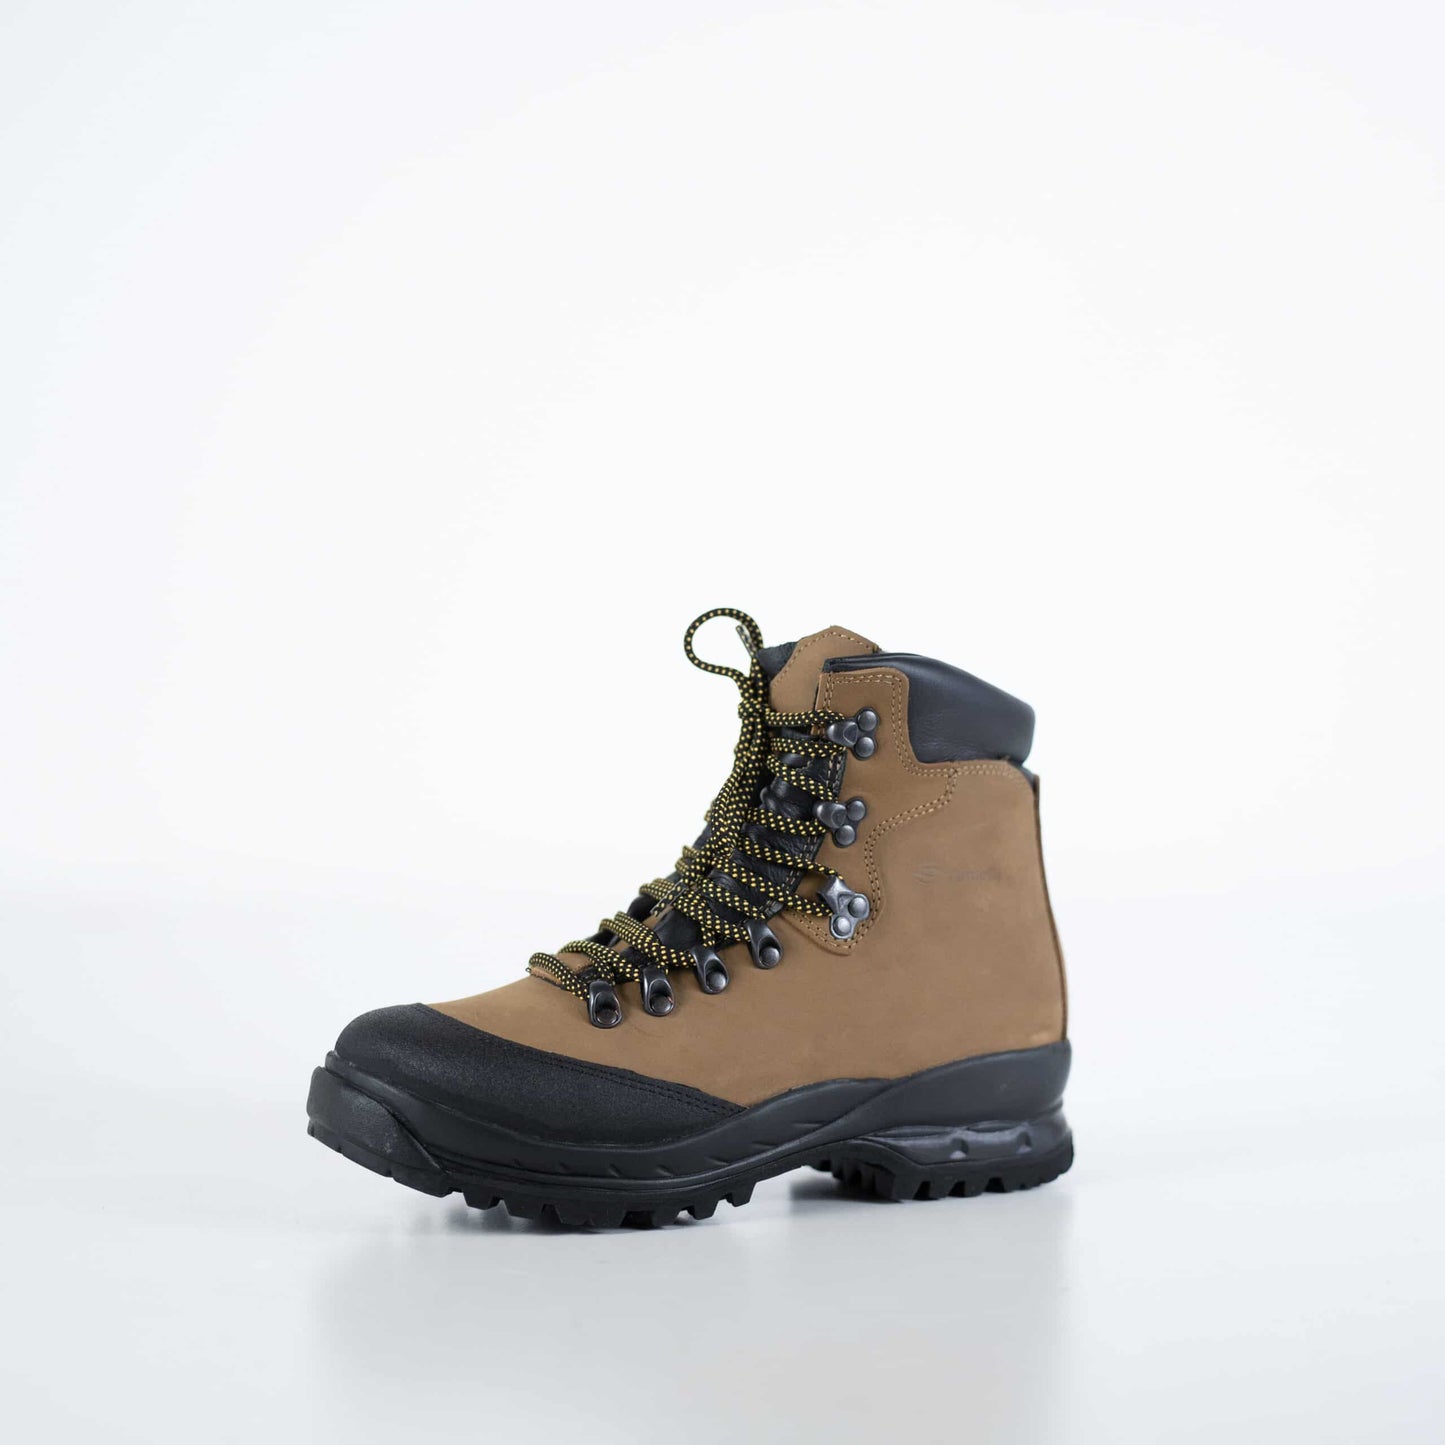 553P Tundra Hiking Boots with protector